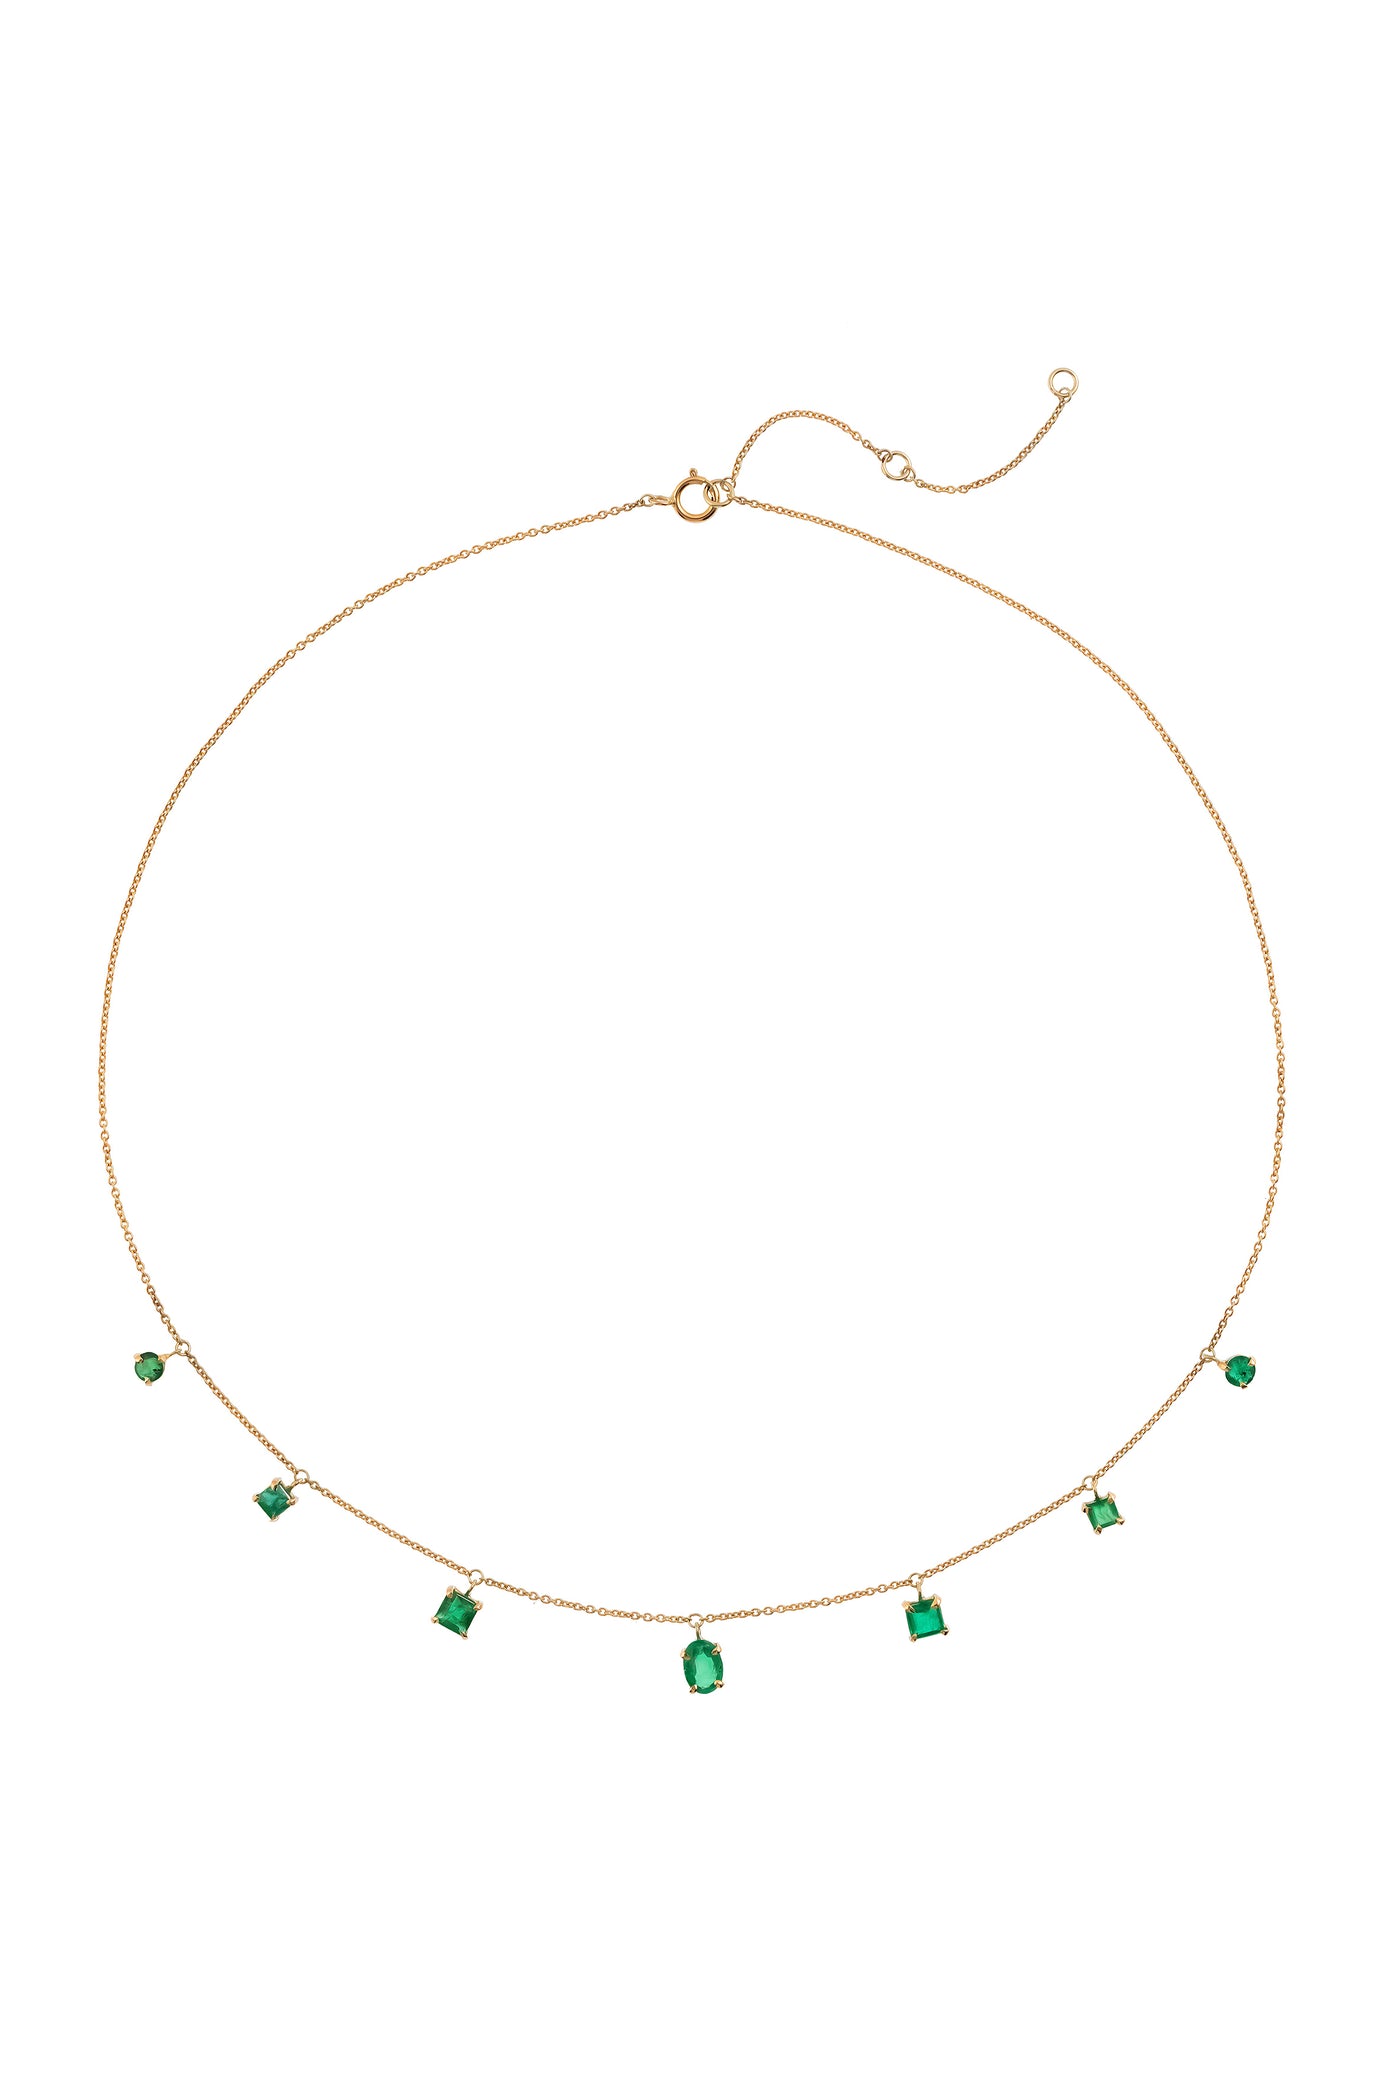 Solid gold Emerald necklace, 42 cm